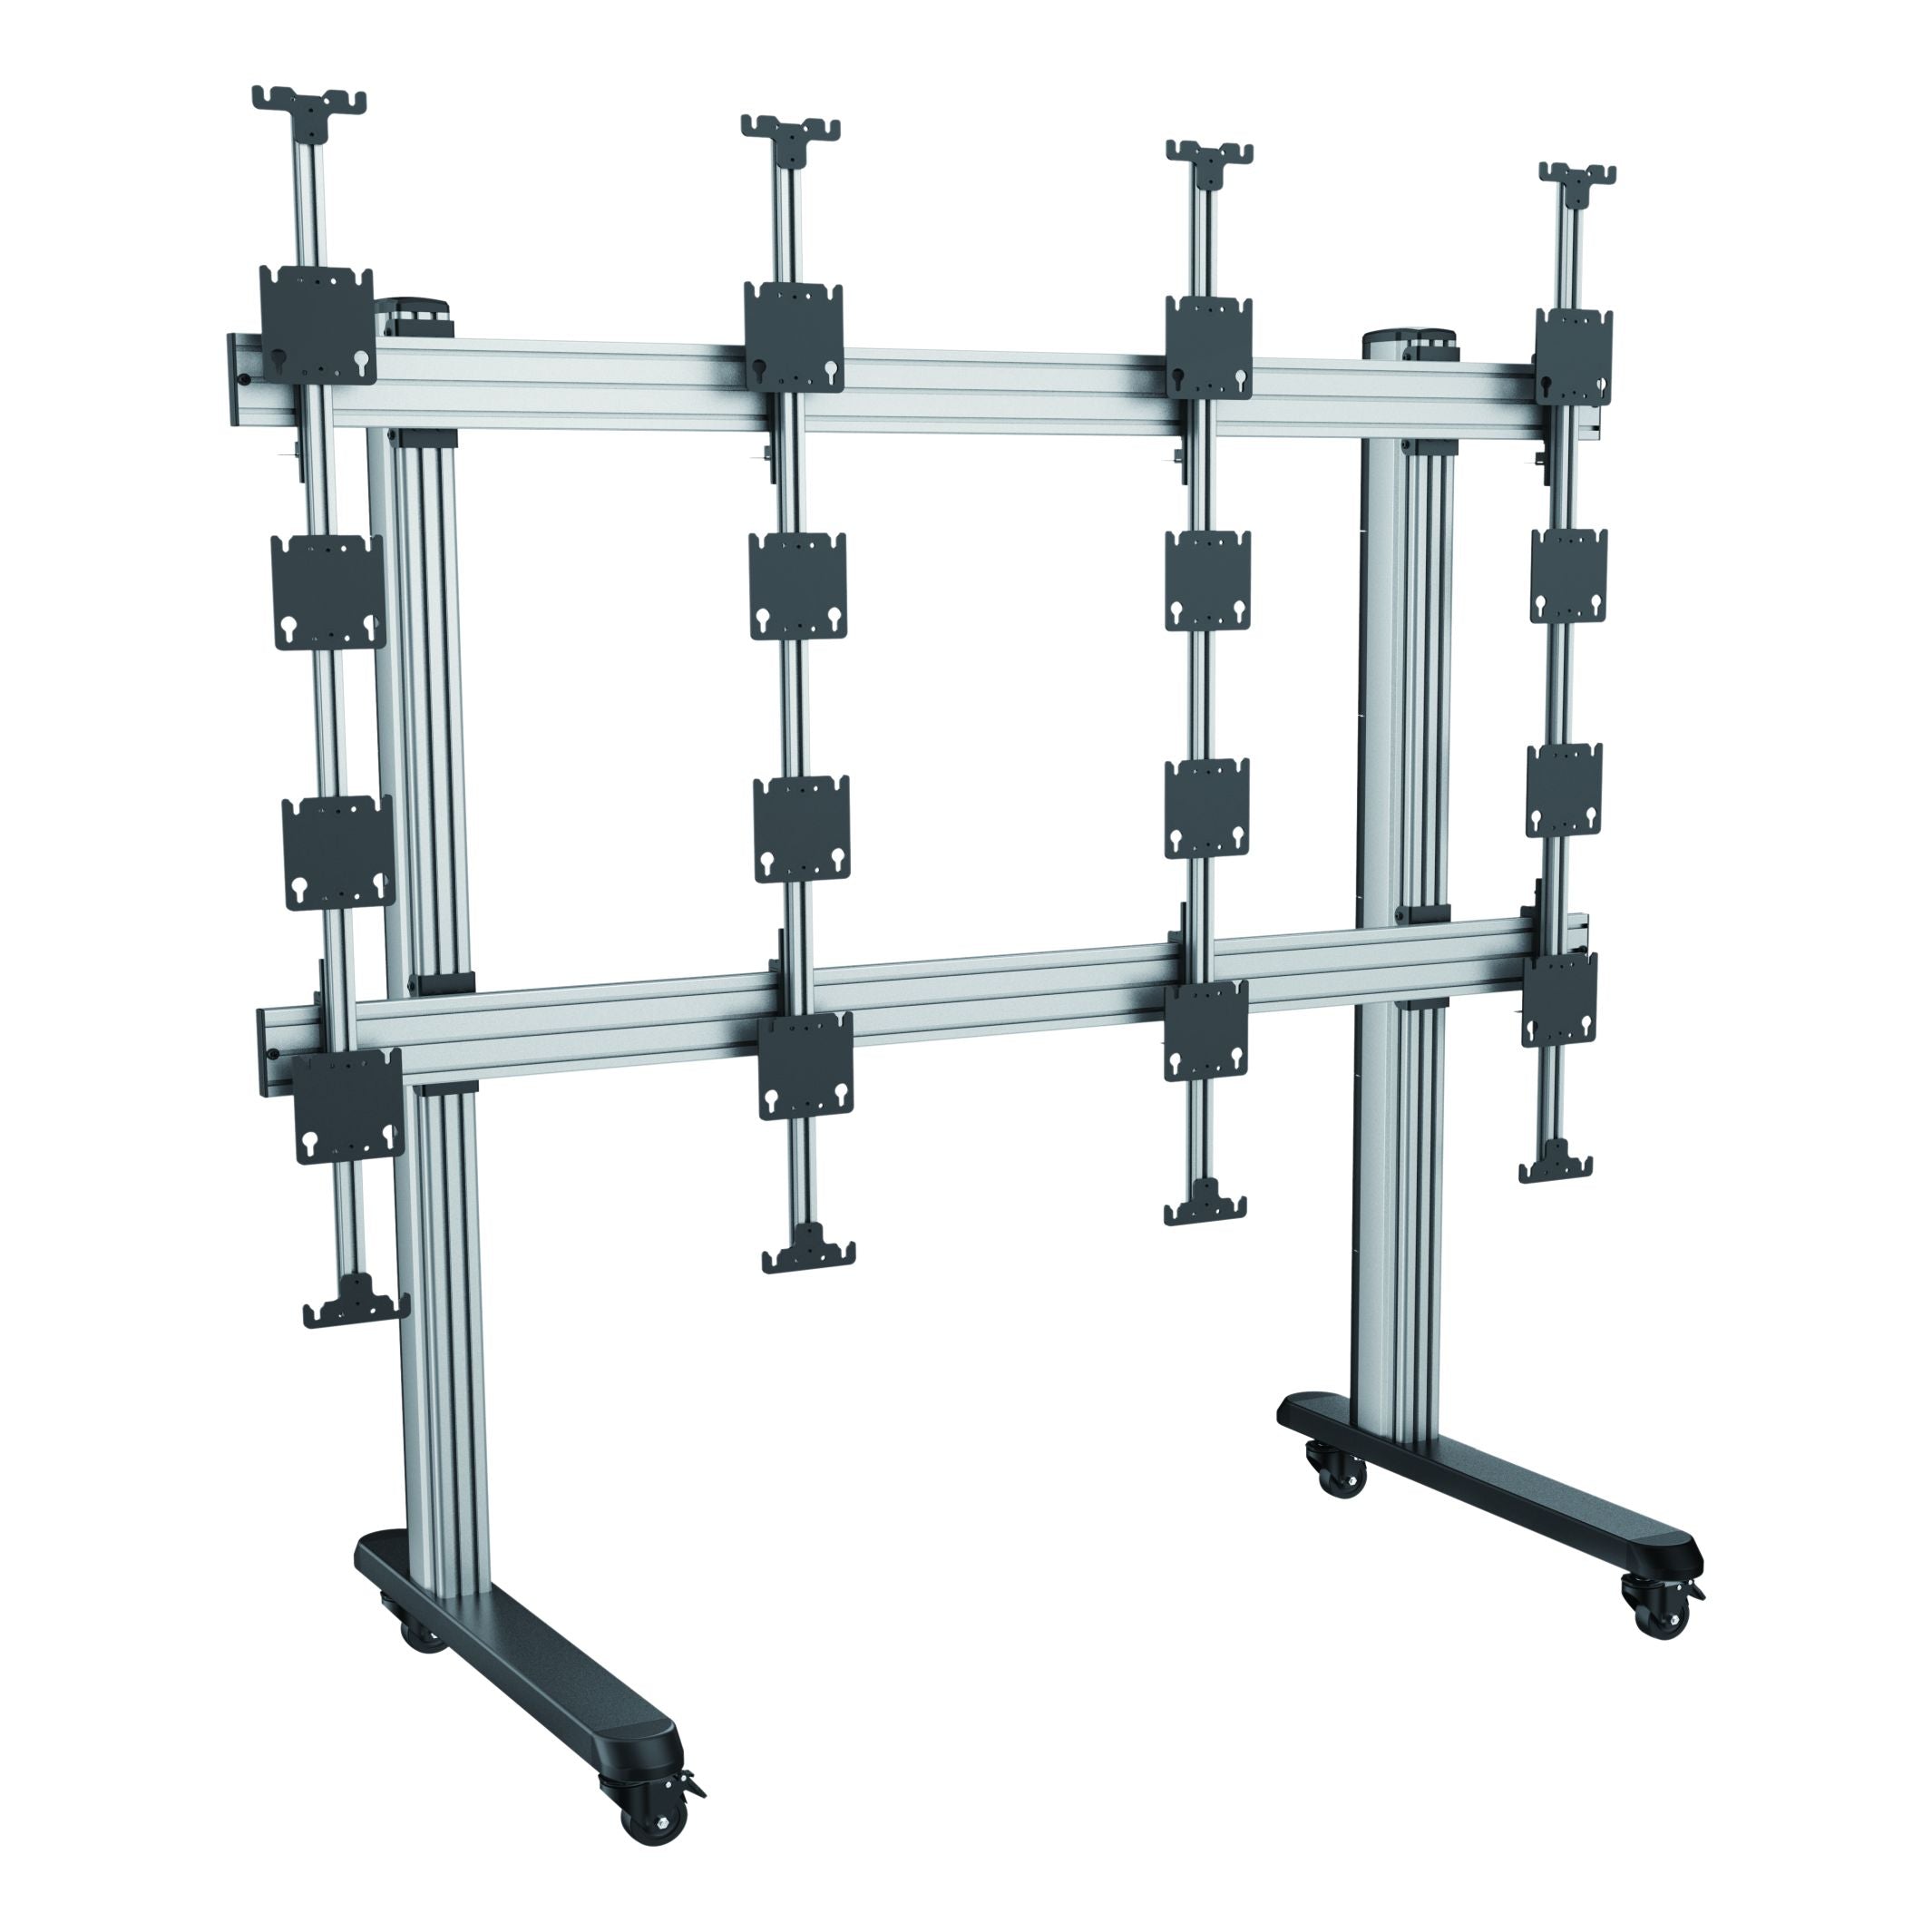 Absen Acclaim® Series Display Stand with Locking Casters, Leveling Feet, or Bolt-Down Base